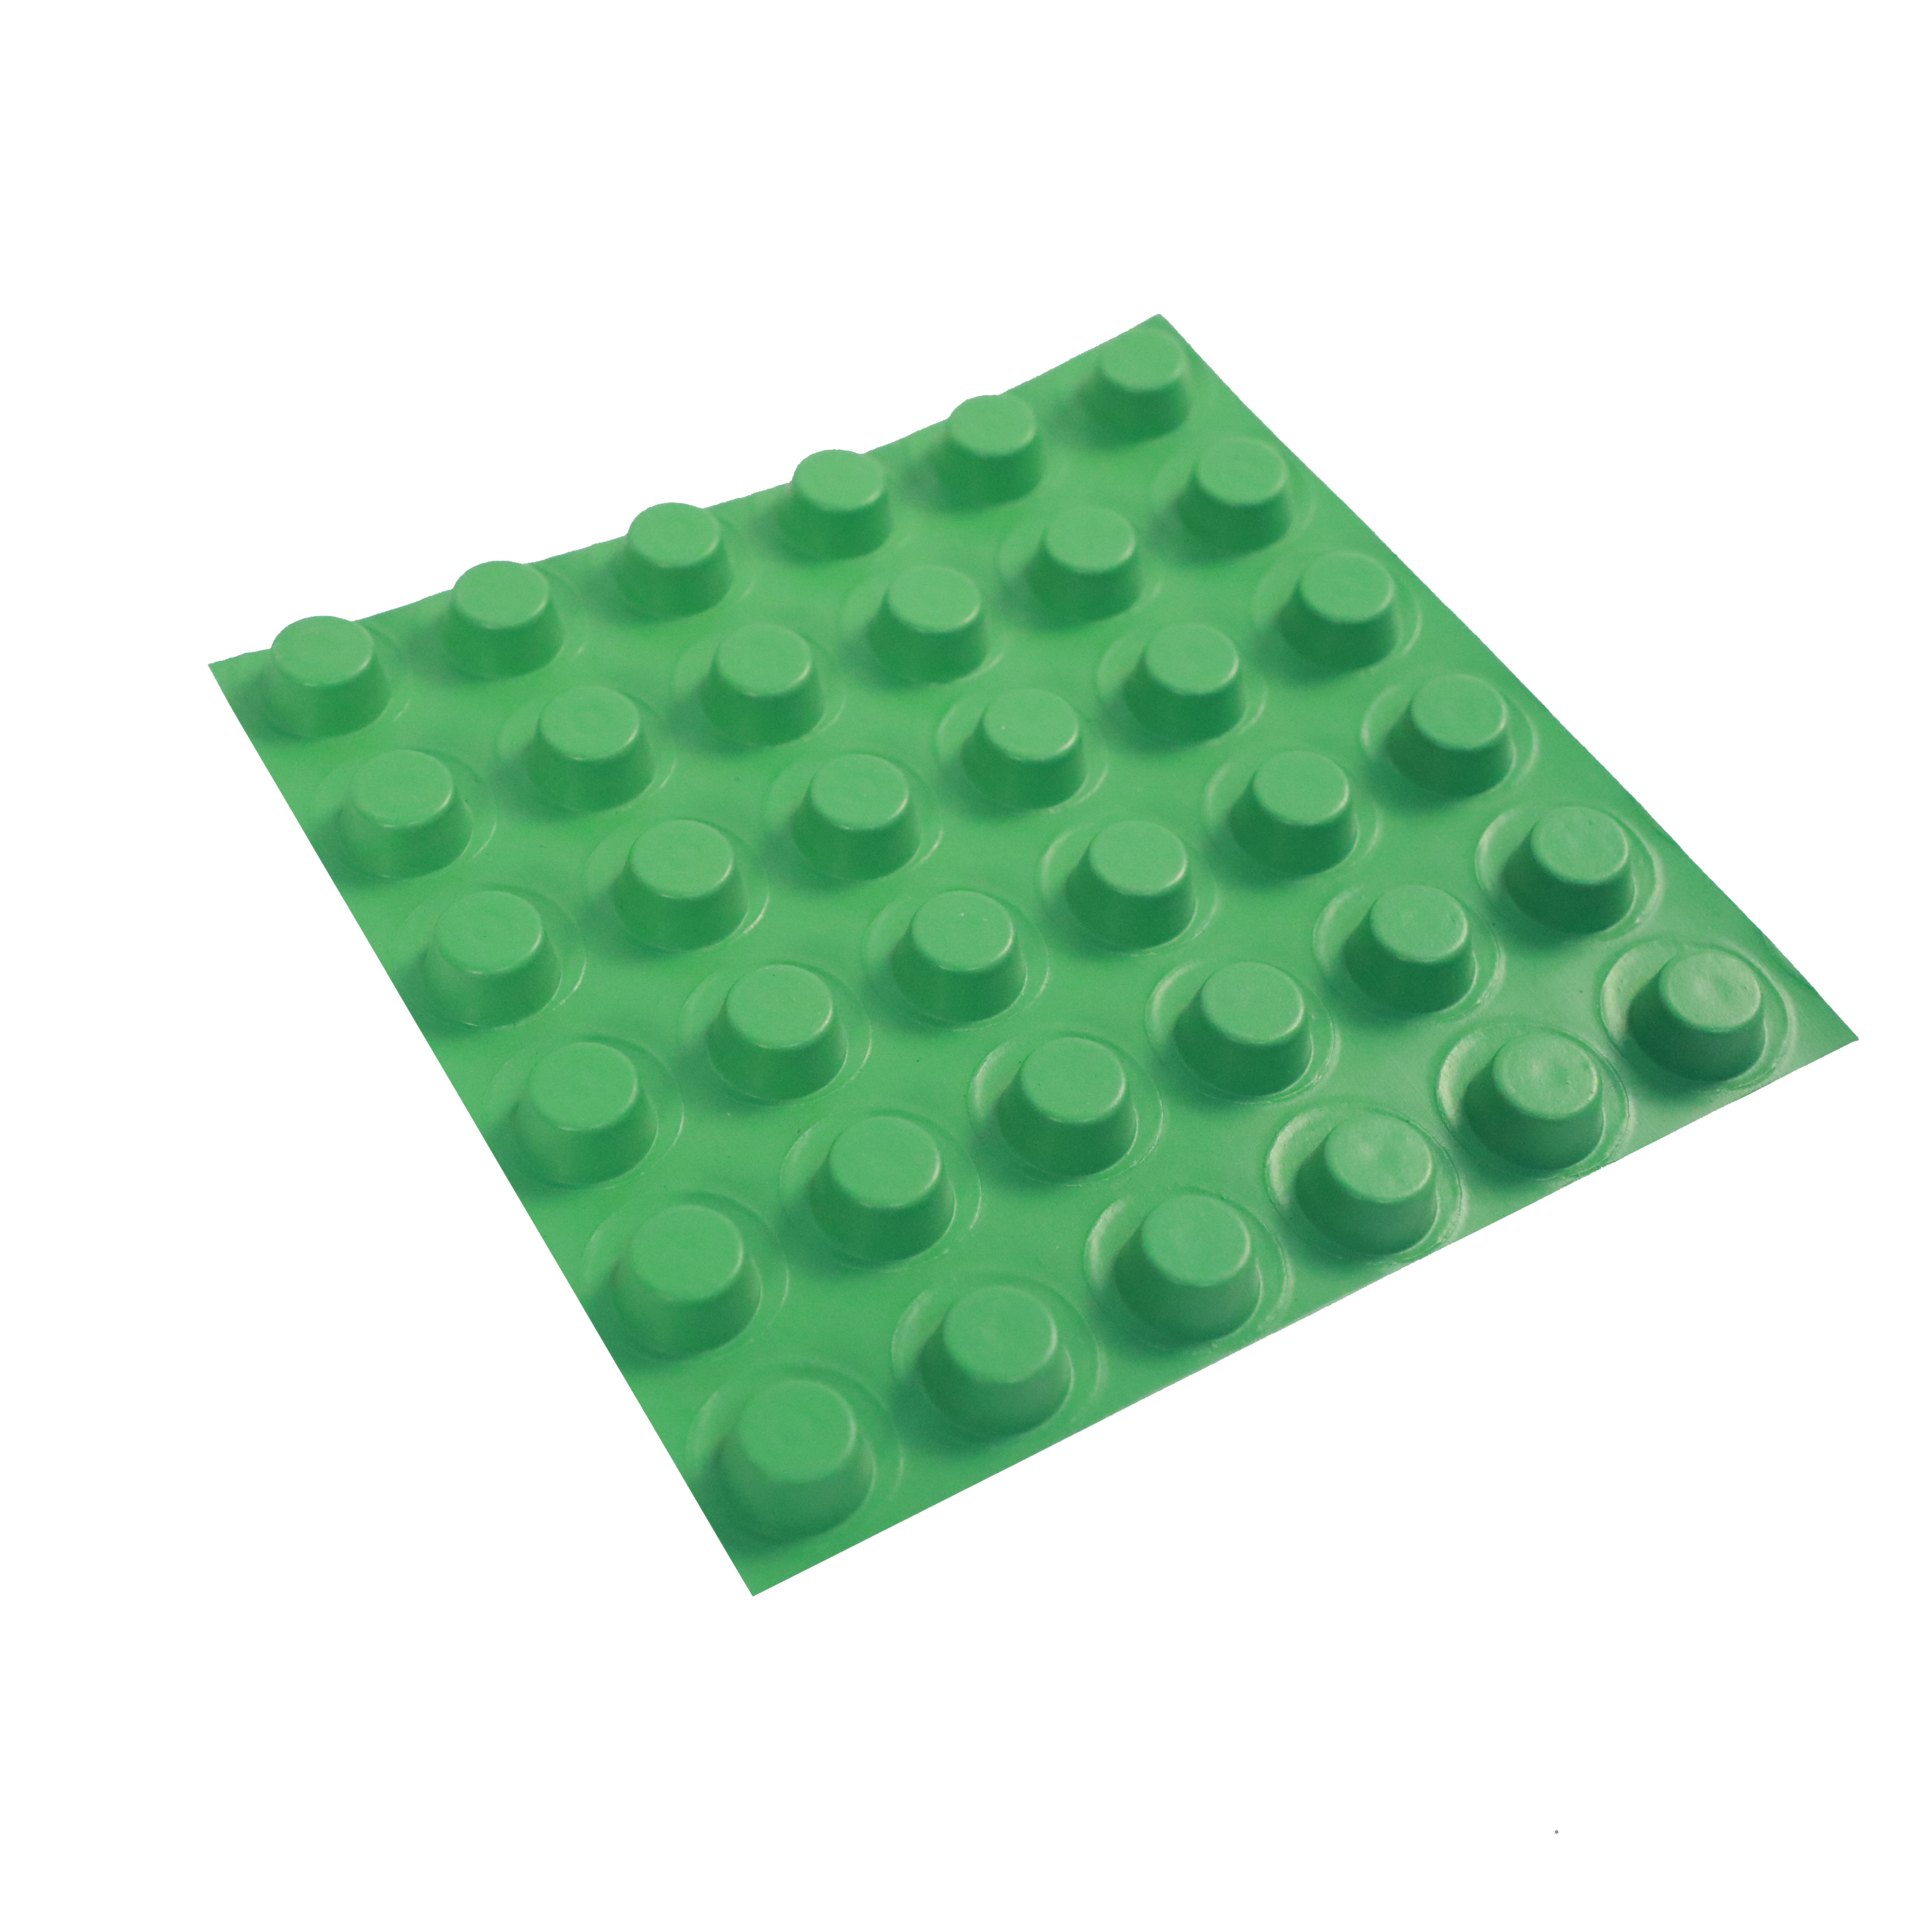  HDPE plastic coil drainage board garage roof basement roof garden